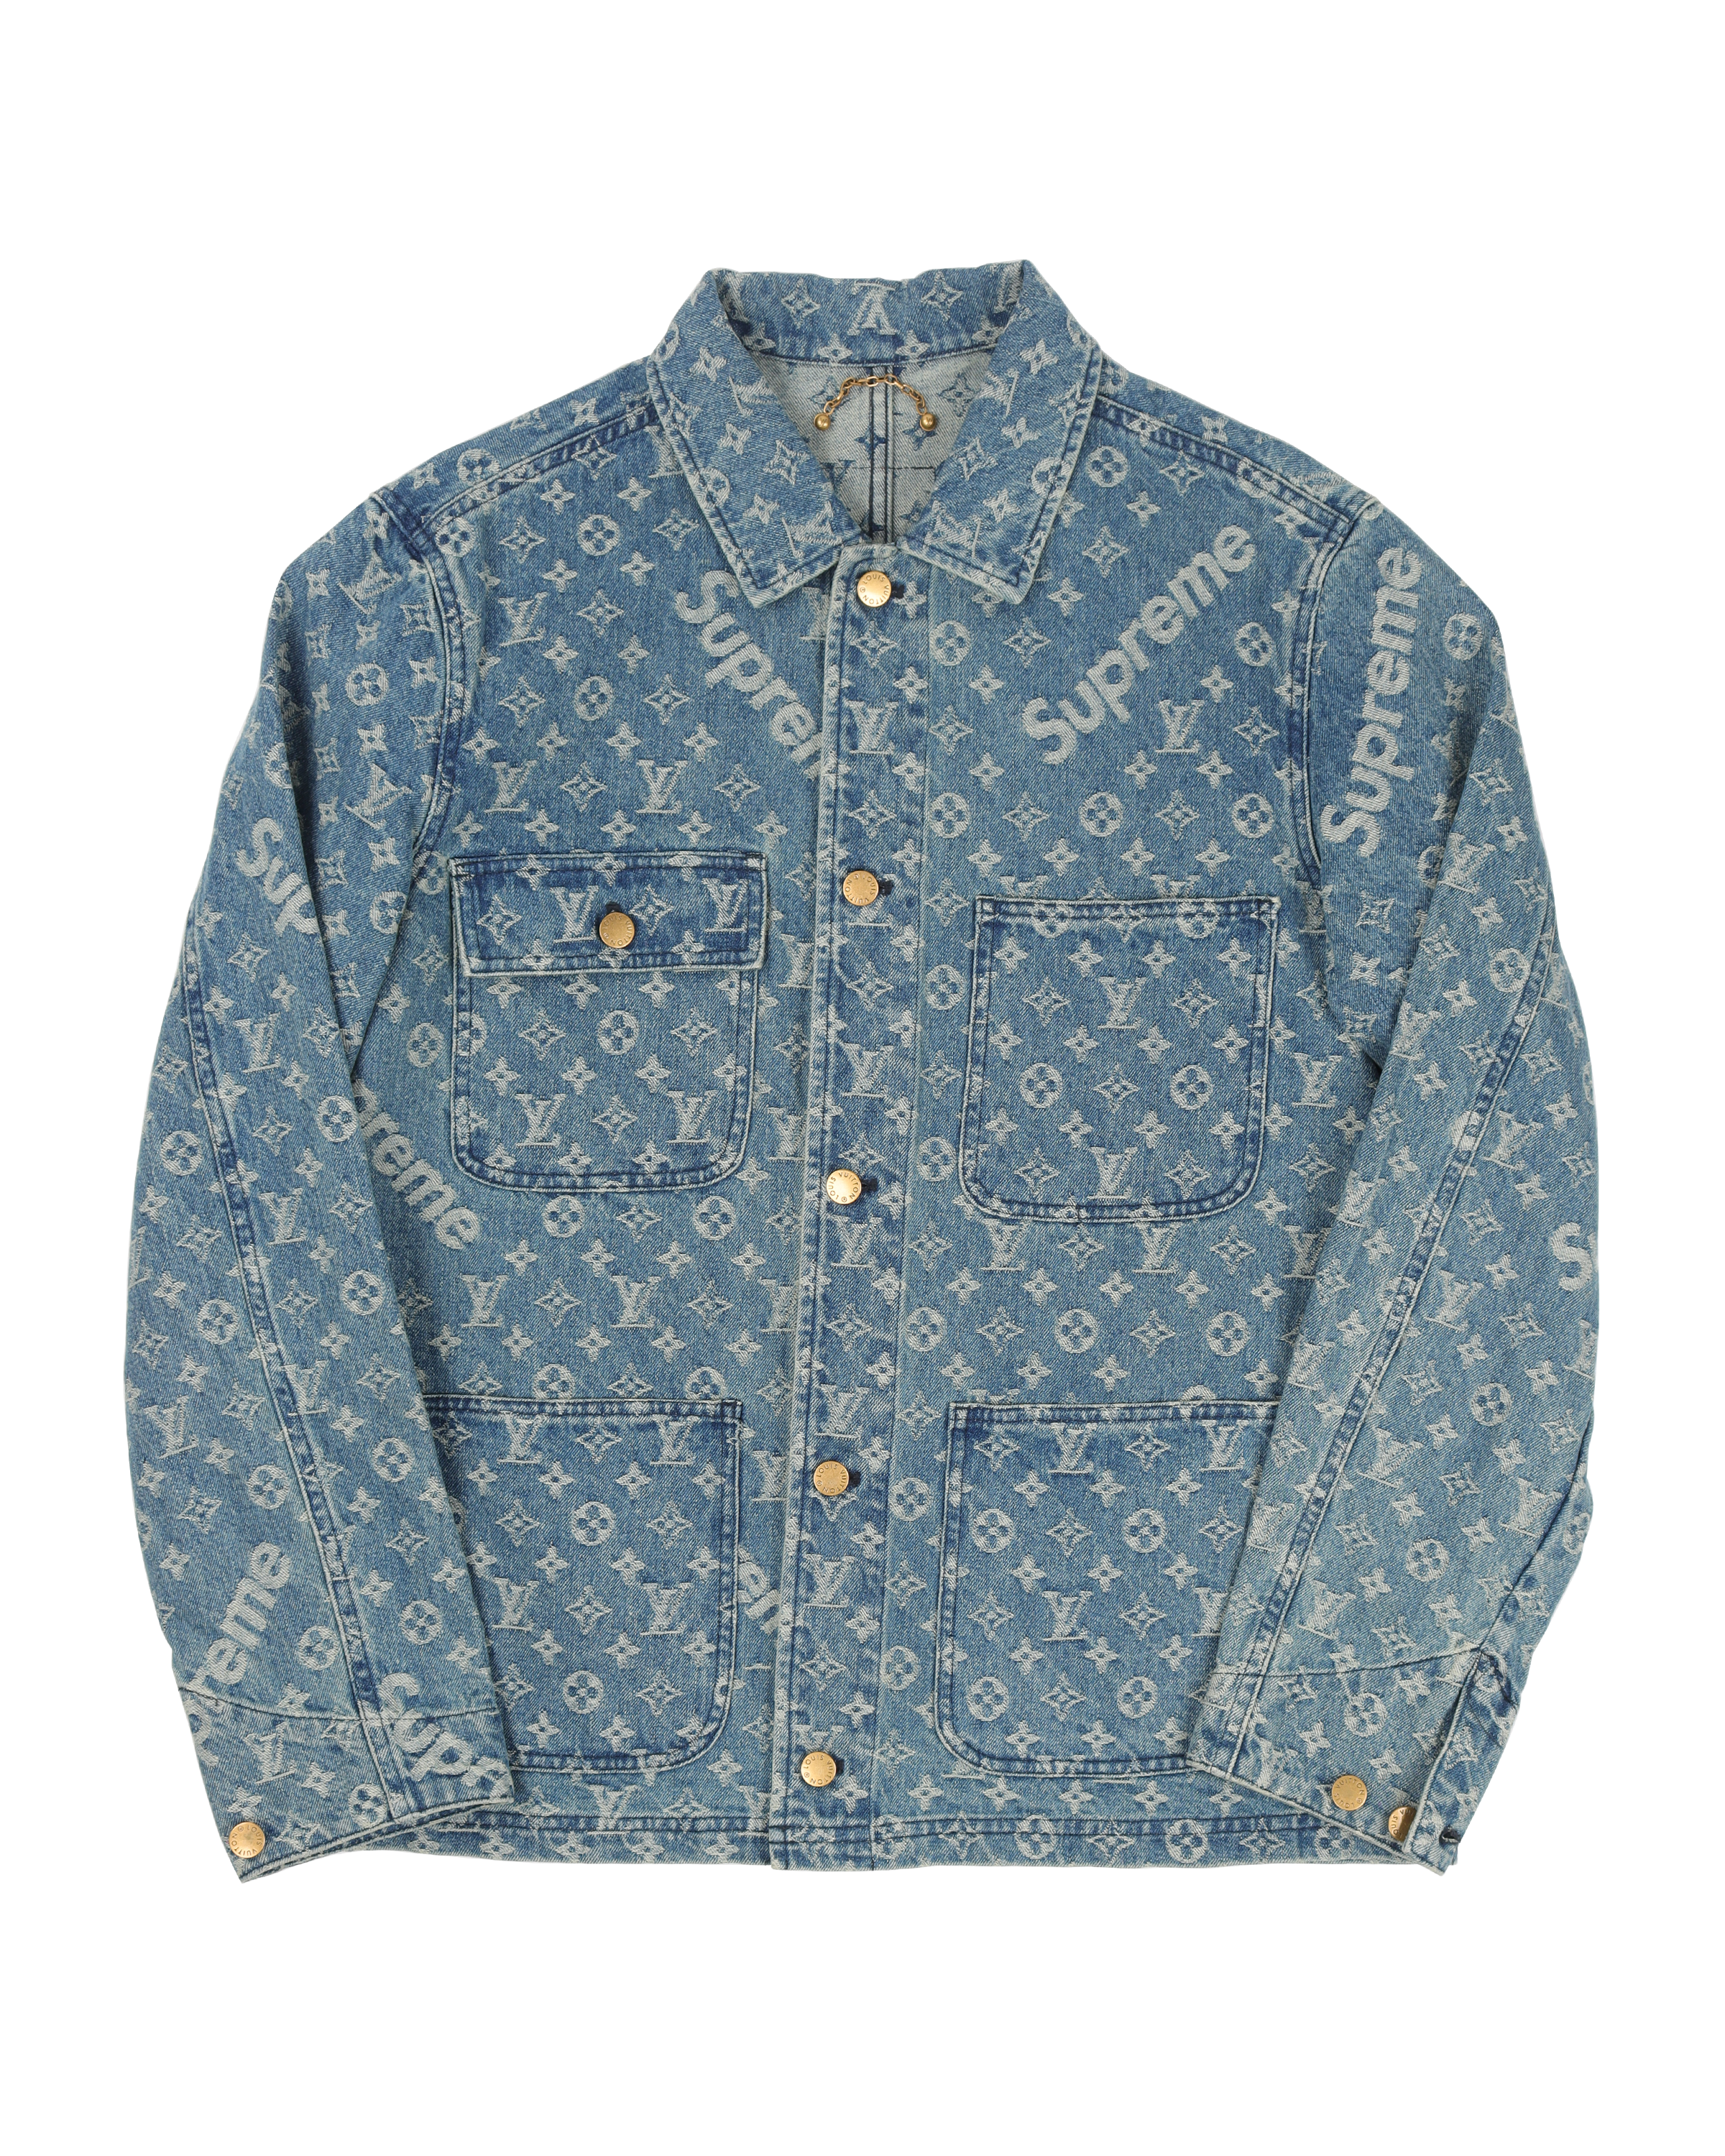 Supreme Louis Vuitton/Supreme Jacquard Denim Chore Coat ❤ liked on Polyvore  featuring outerwear, coats and bags